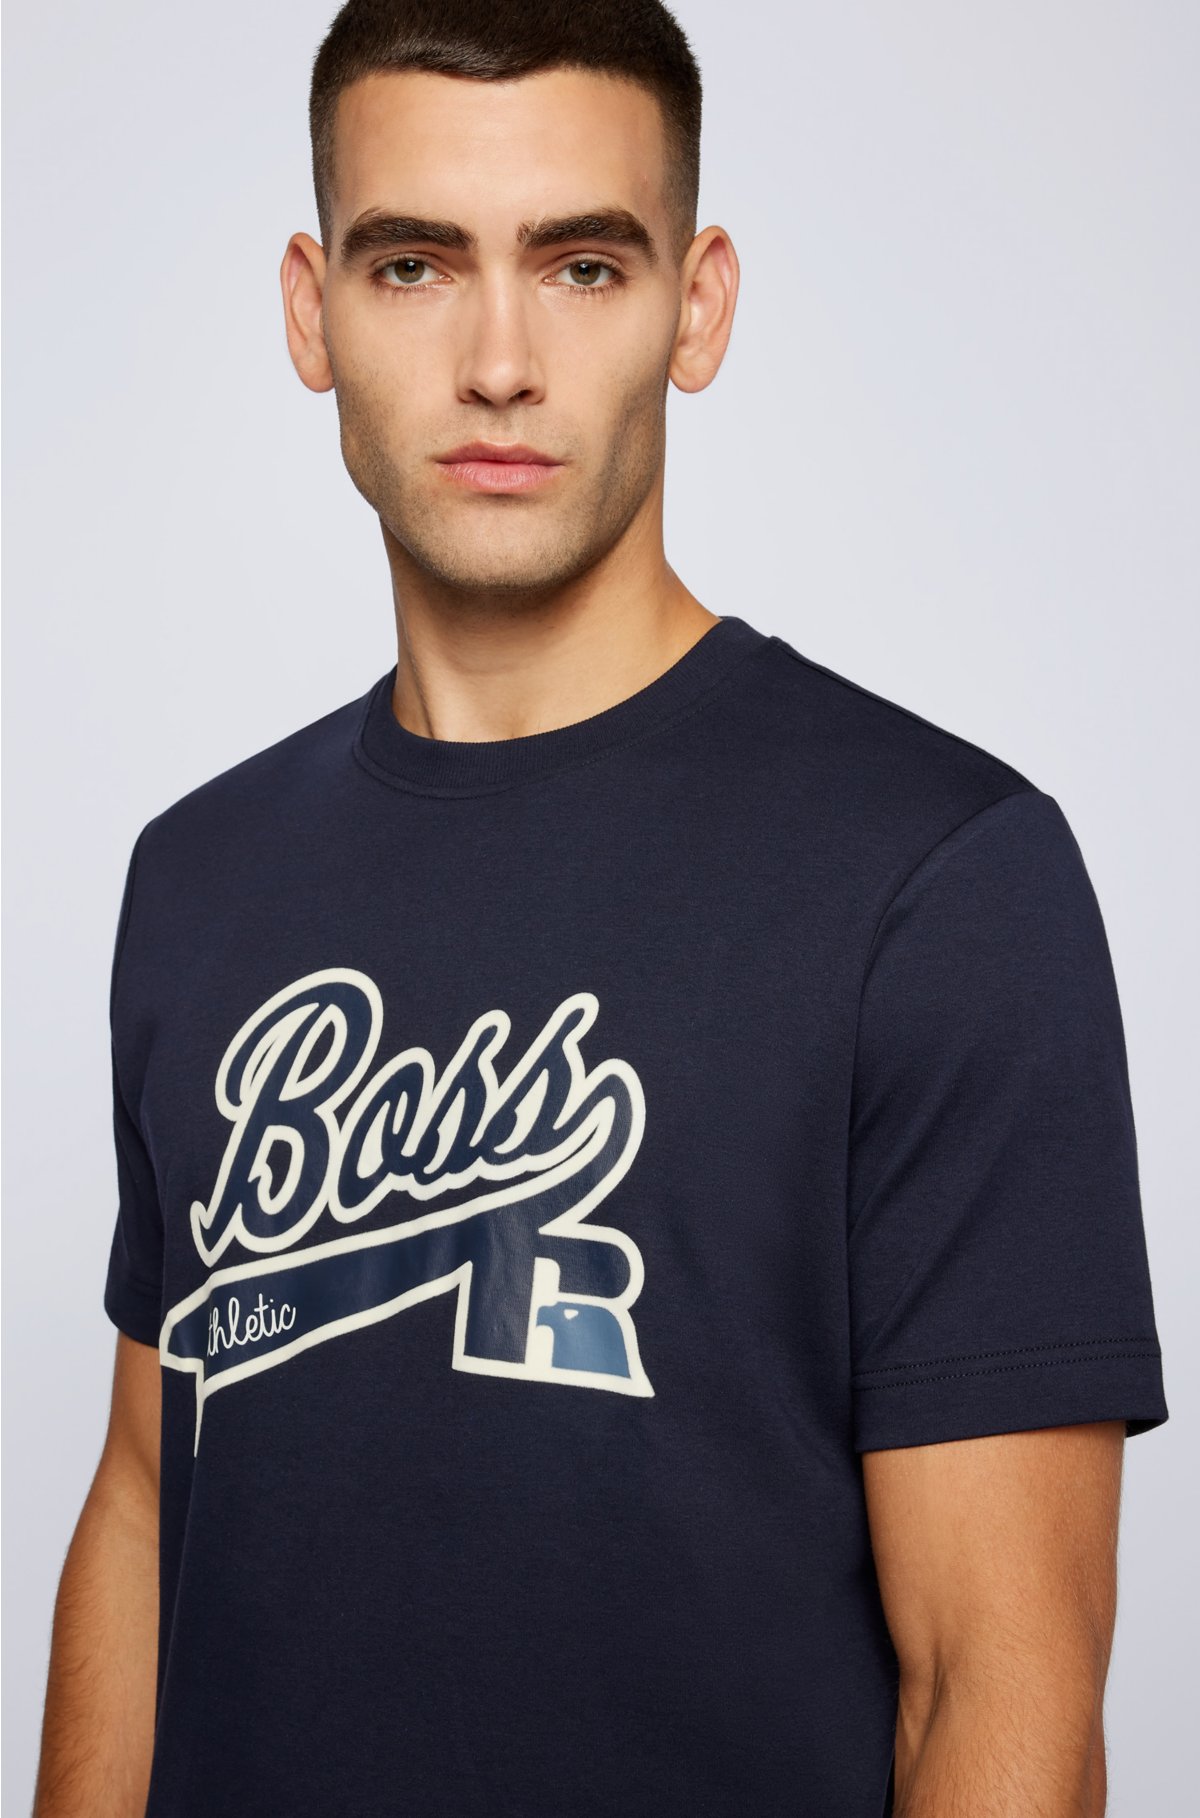 Boss x Russell Athletic Unisex Relaxed-Fit T-shirt